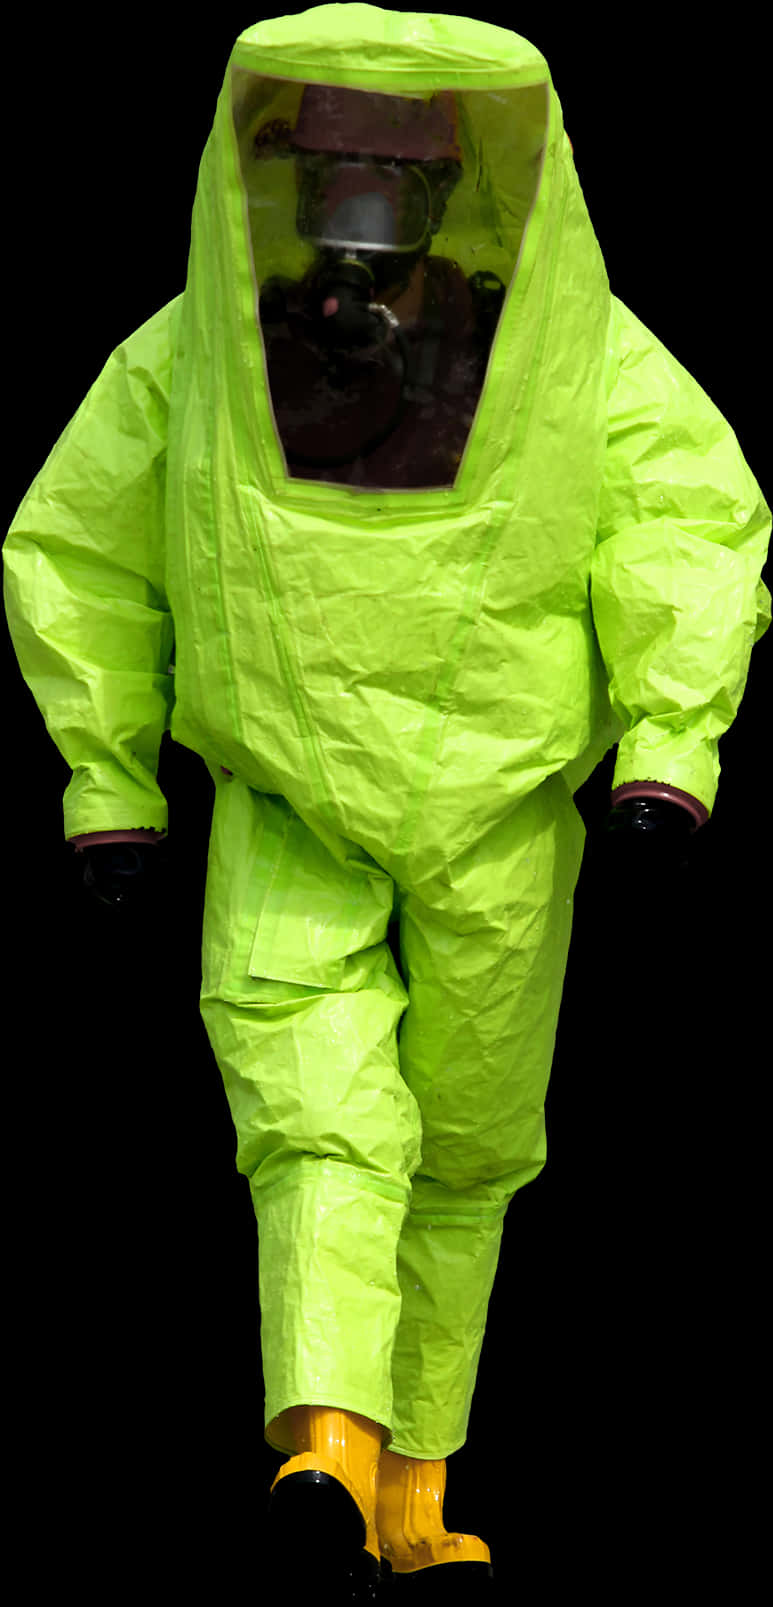 A Person In A Protective Suit